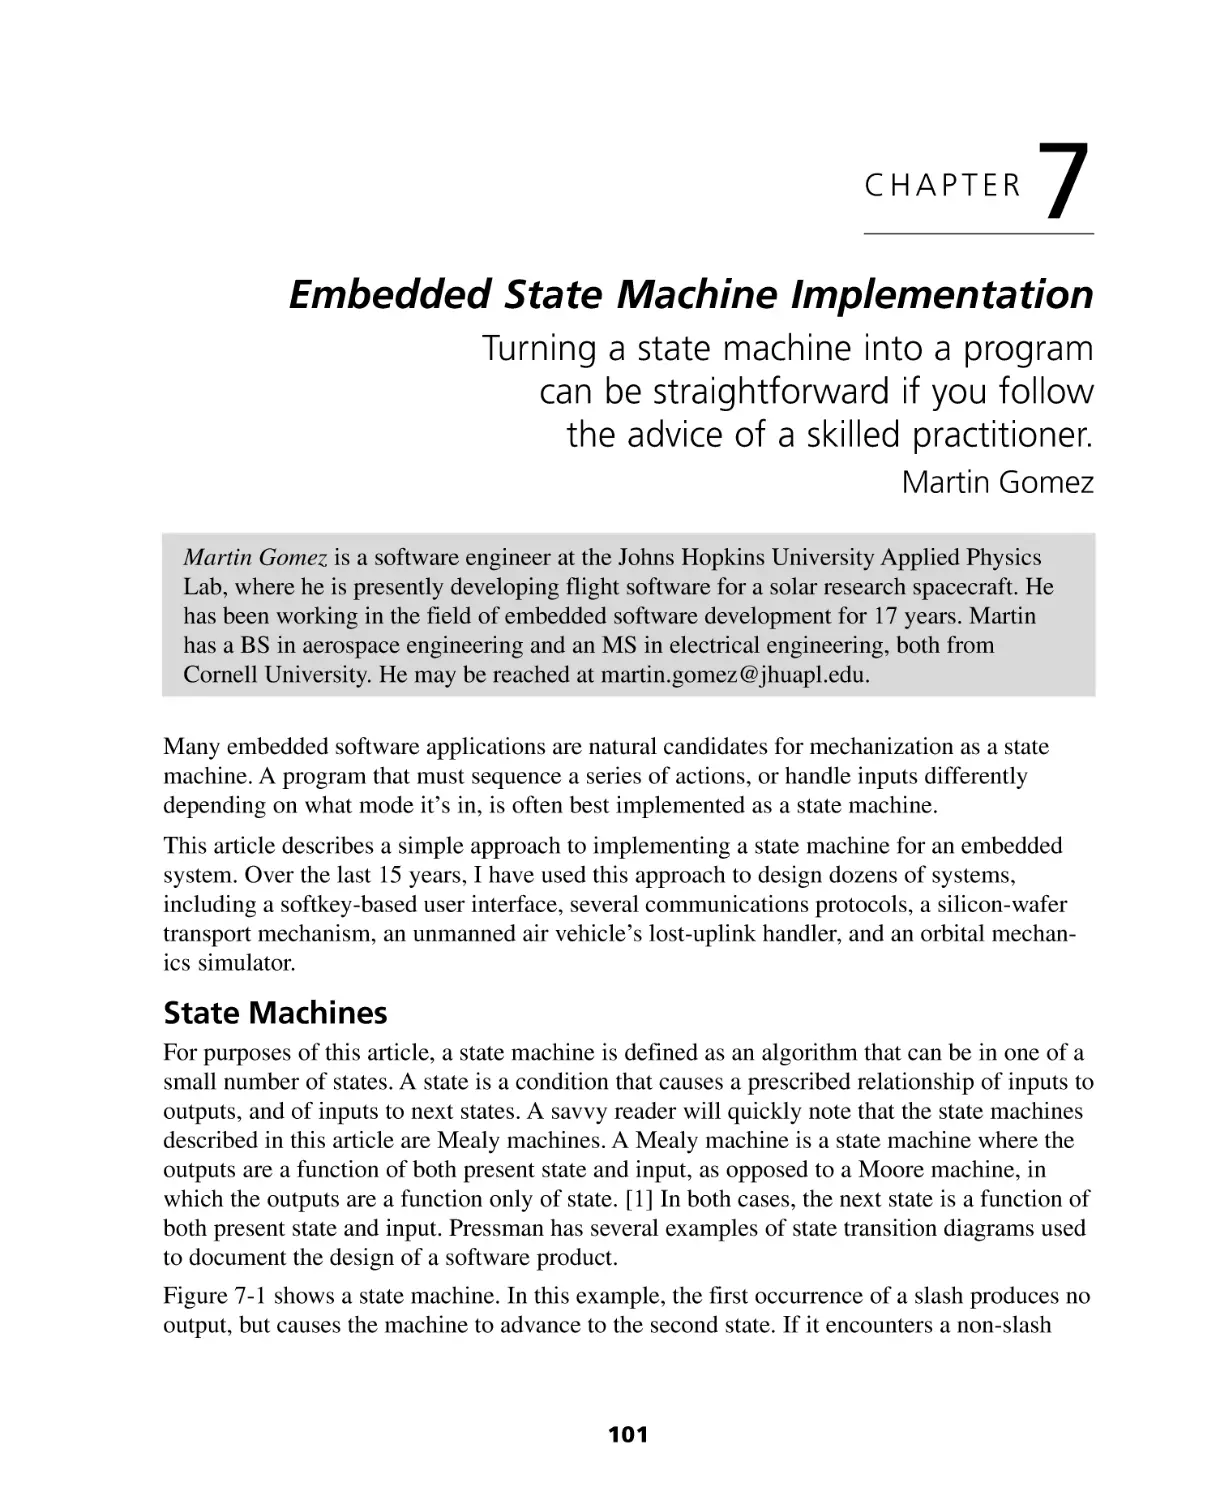 Chapter 7
State Machines